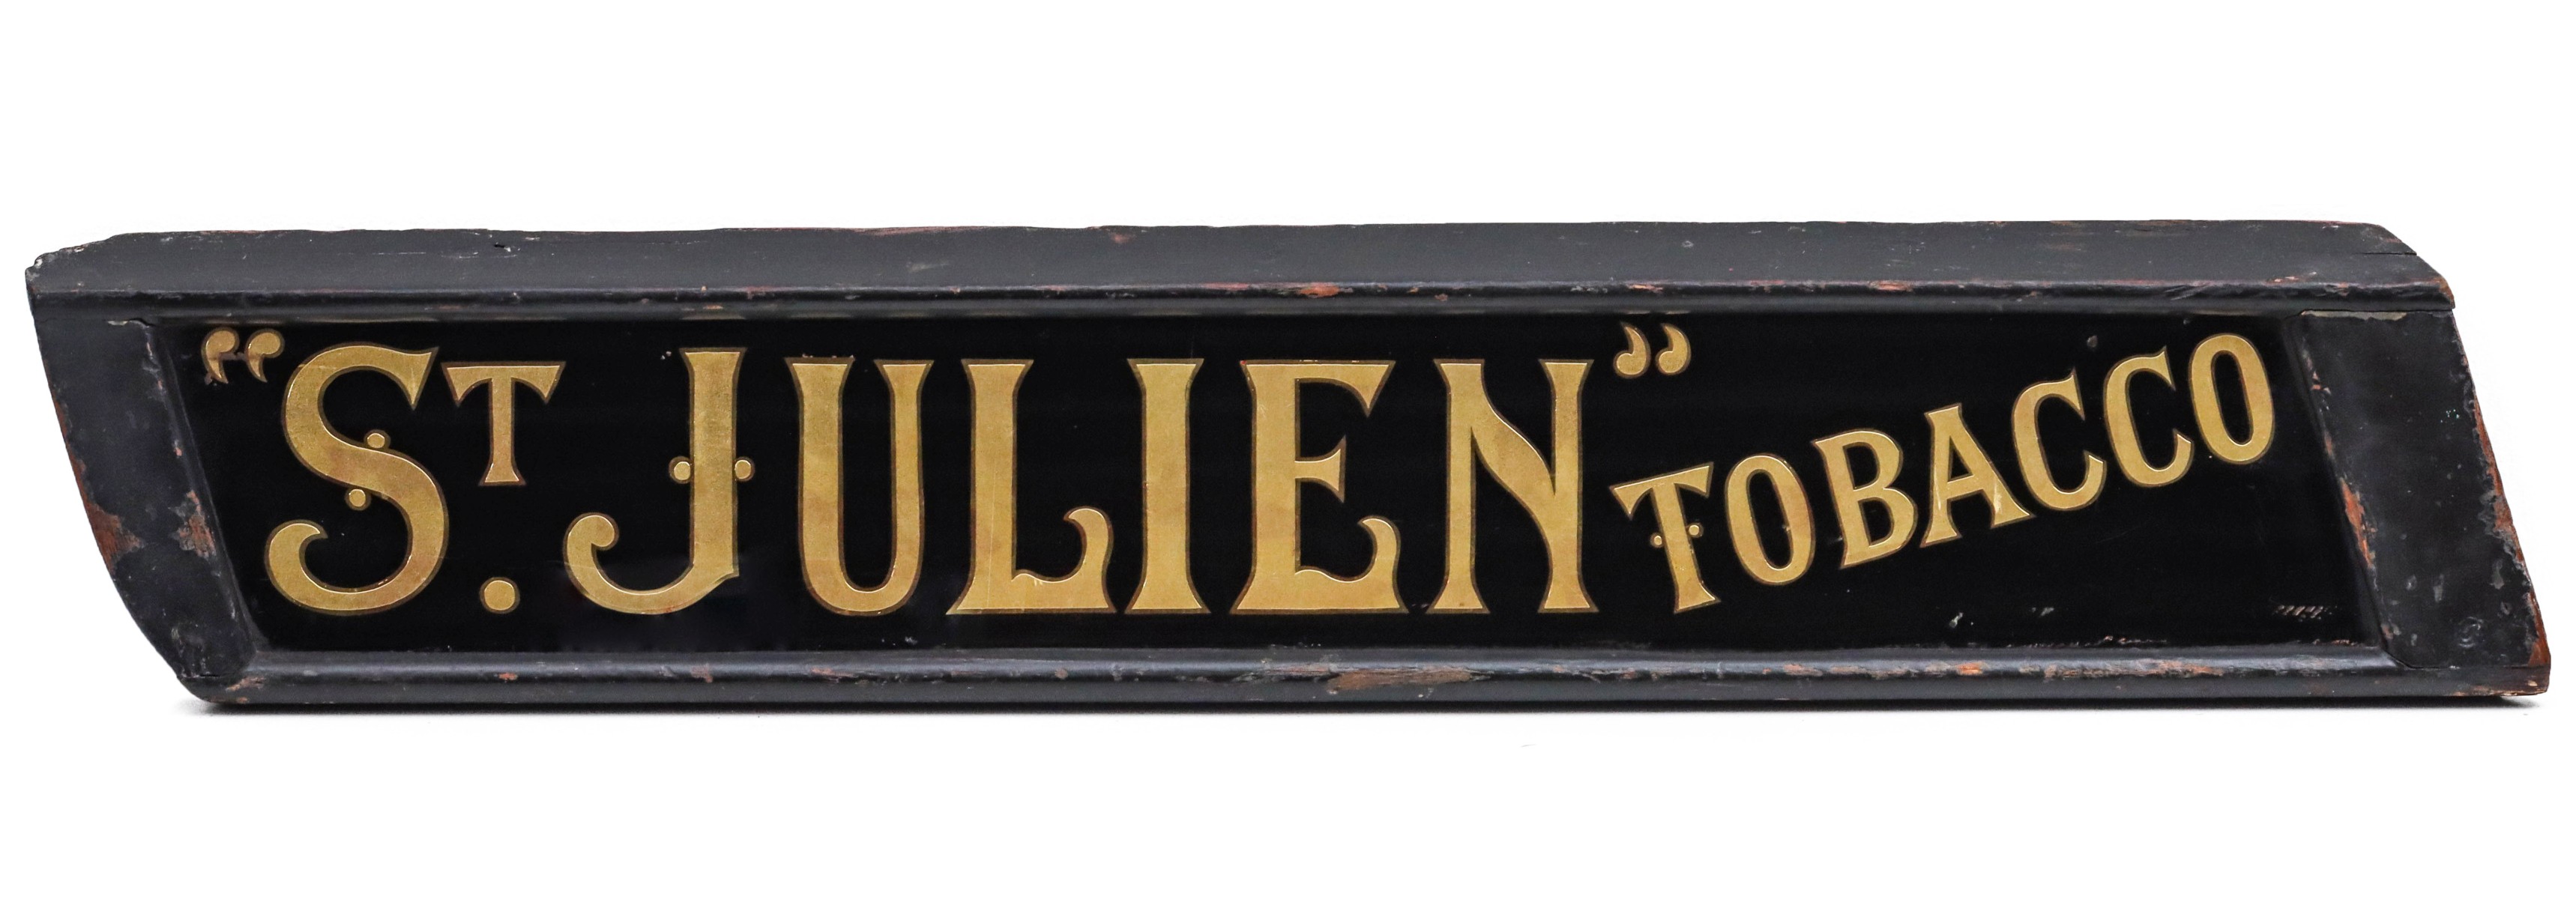 A ST. JULIEN TOBACCO REVERSE PAINTED GLASS SIGN PORTION